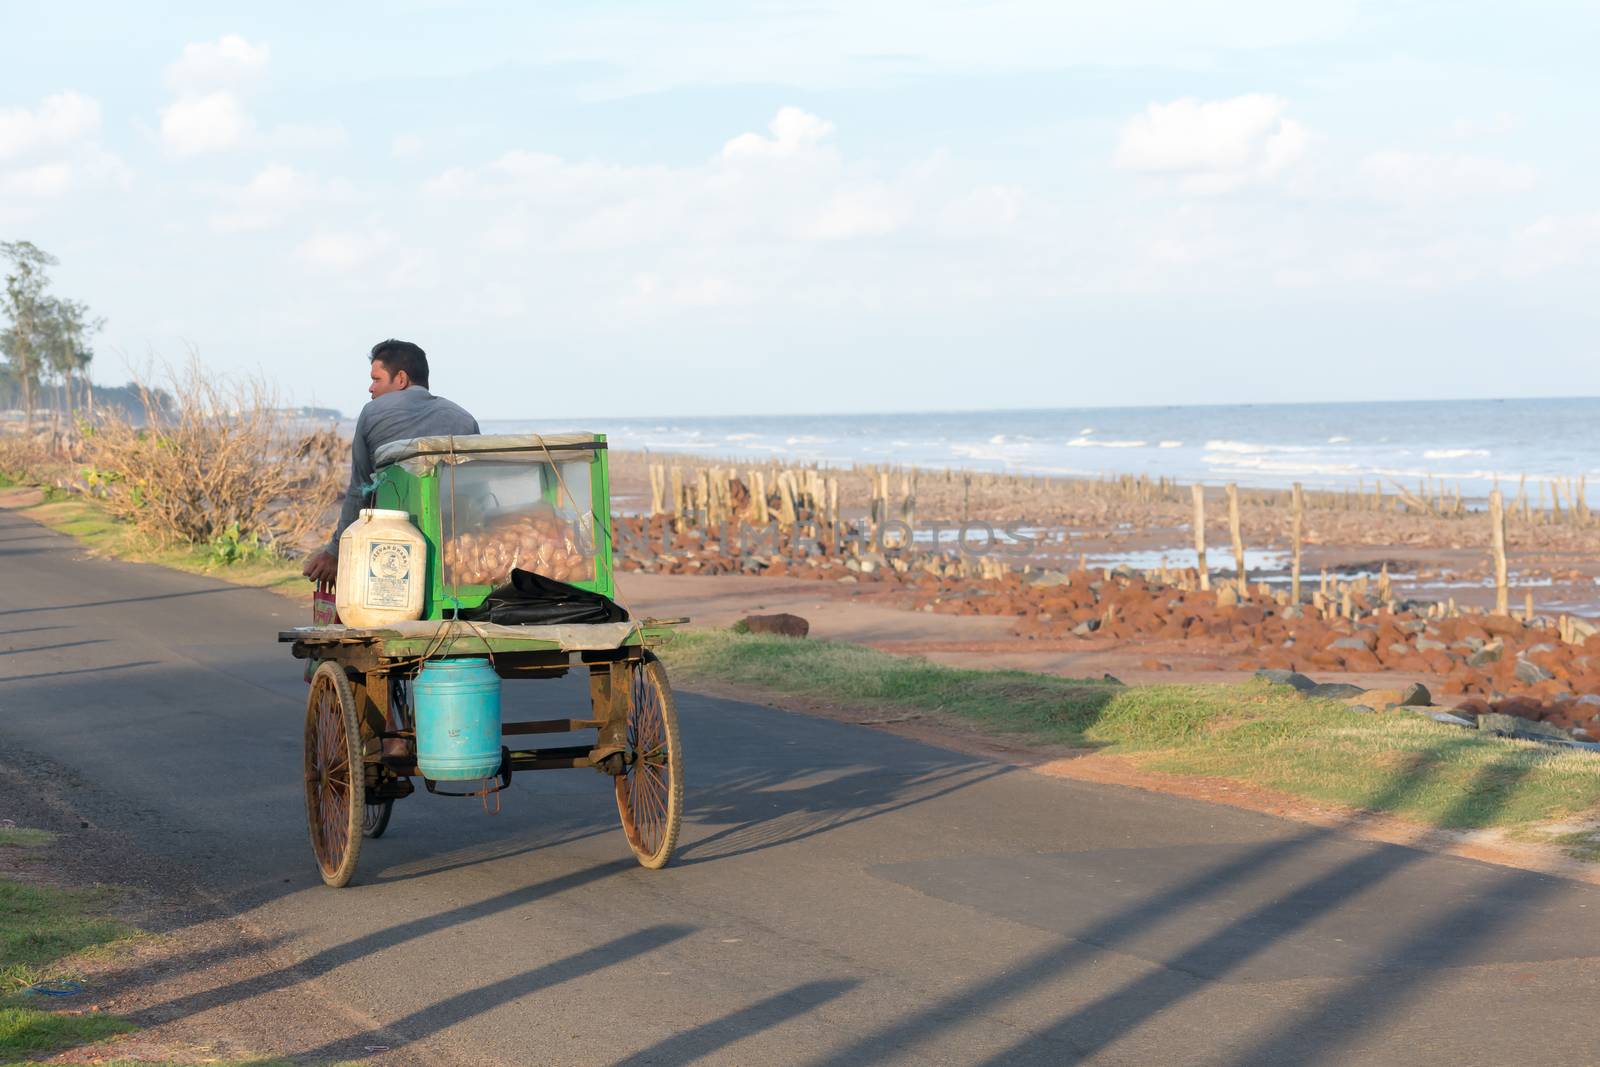 A rural local village mobile street food seller selling phuchka, gol gappa, chaat and pani puri on traditional cycle rickshaw van vehicle in coastal area beach road in summer sunset. India, May 2019